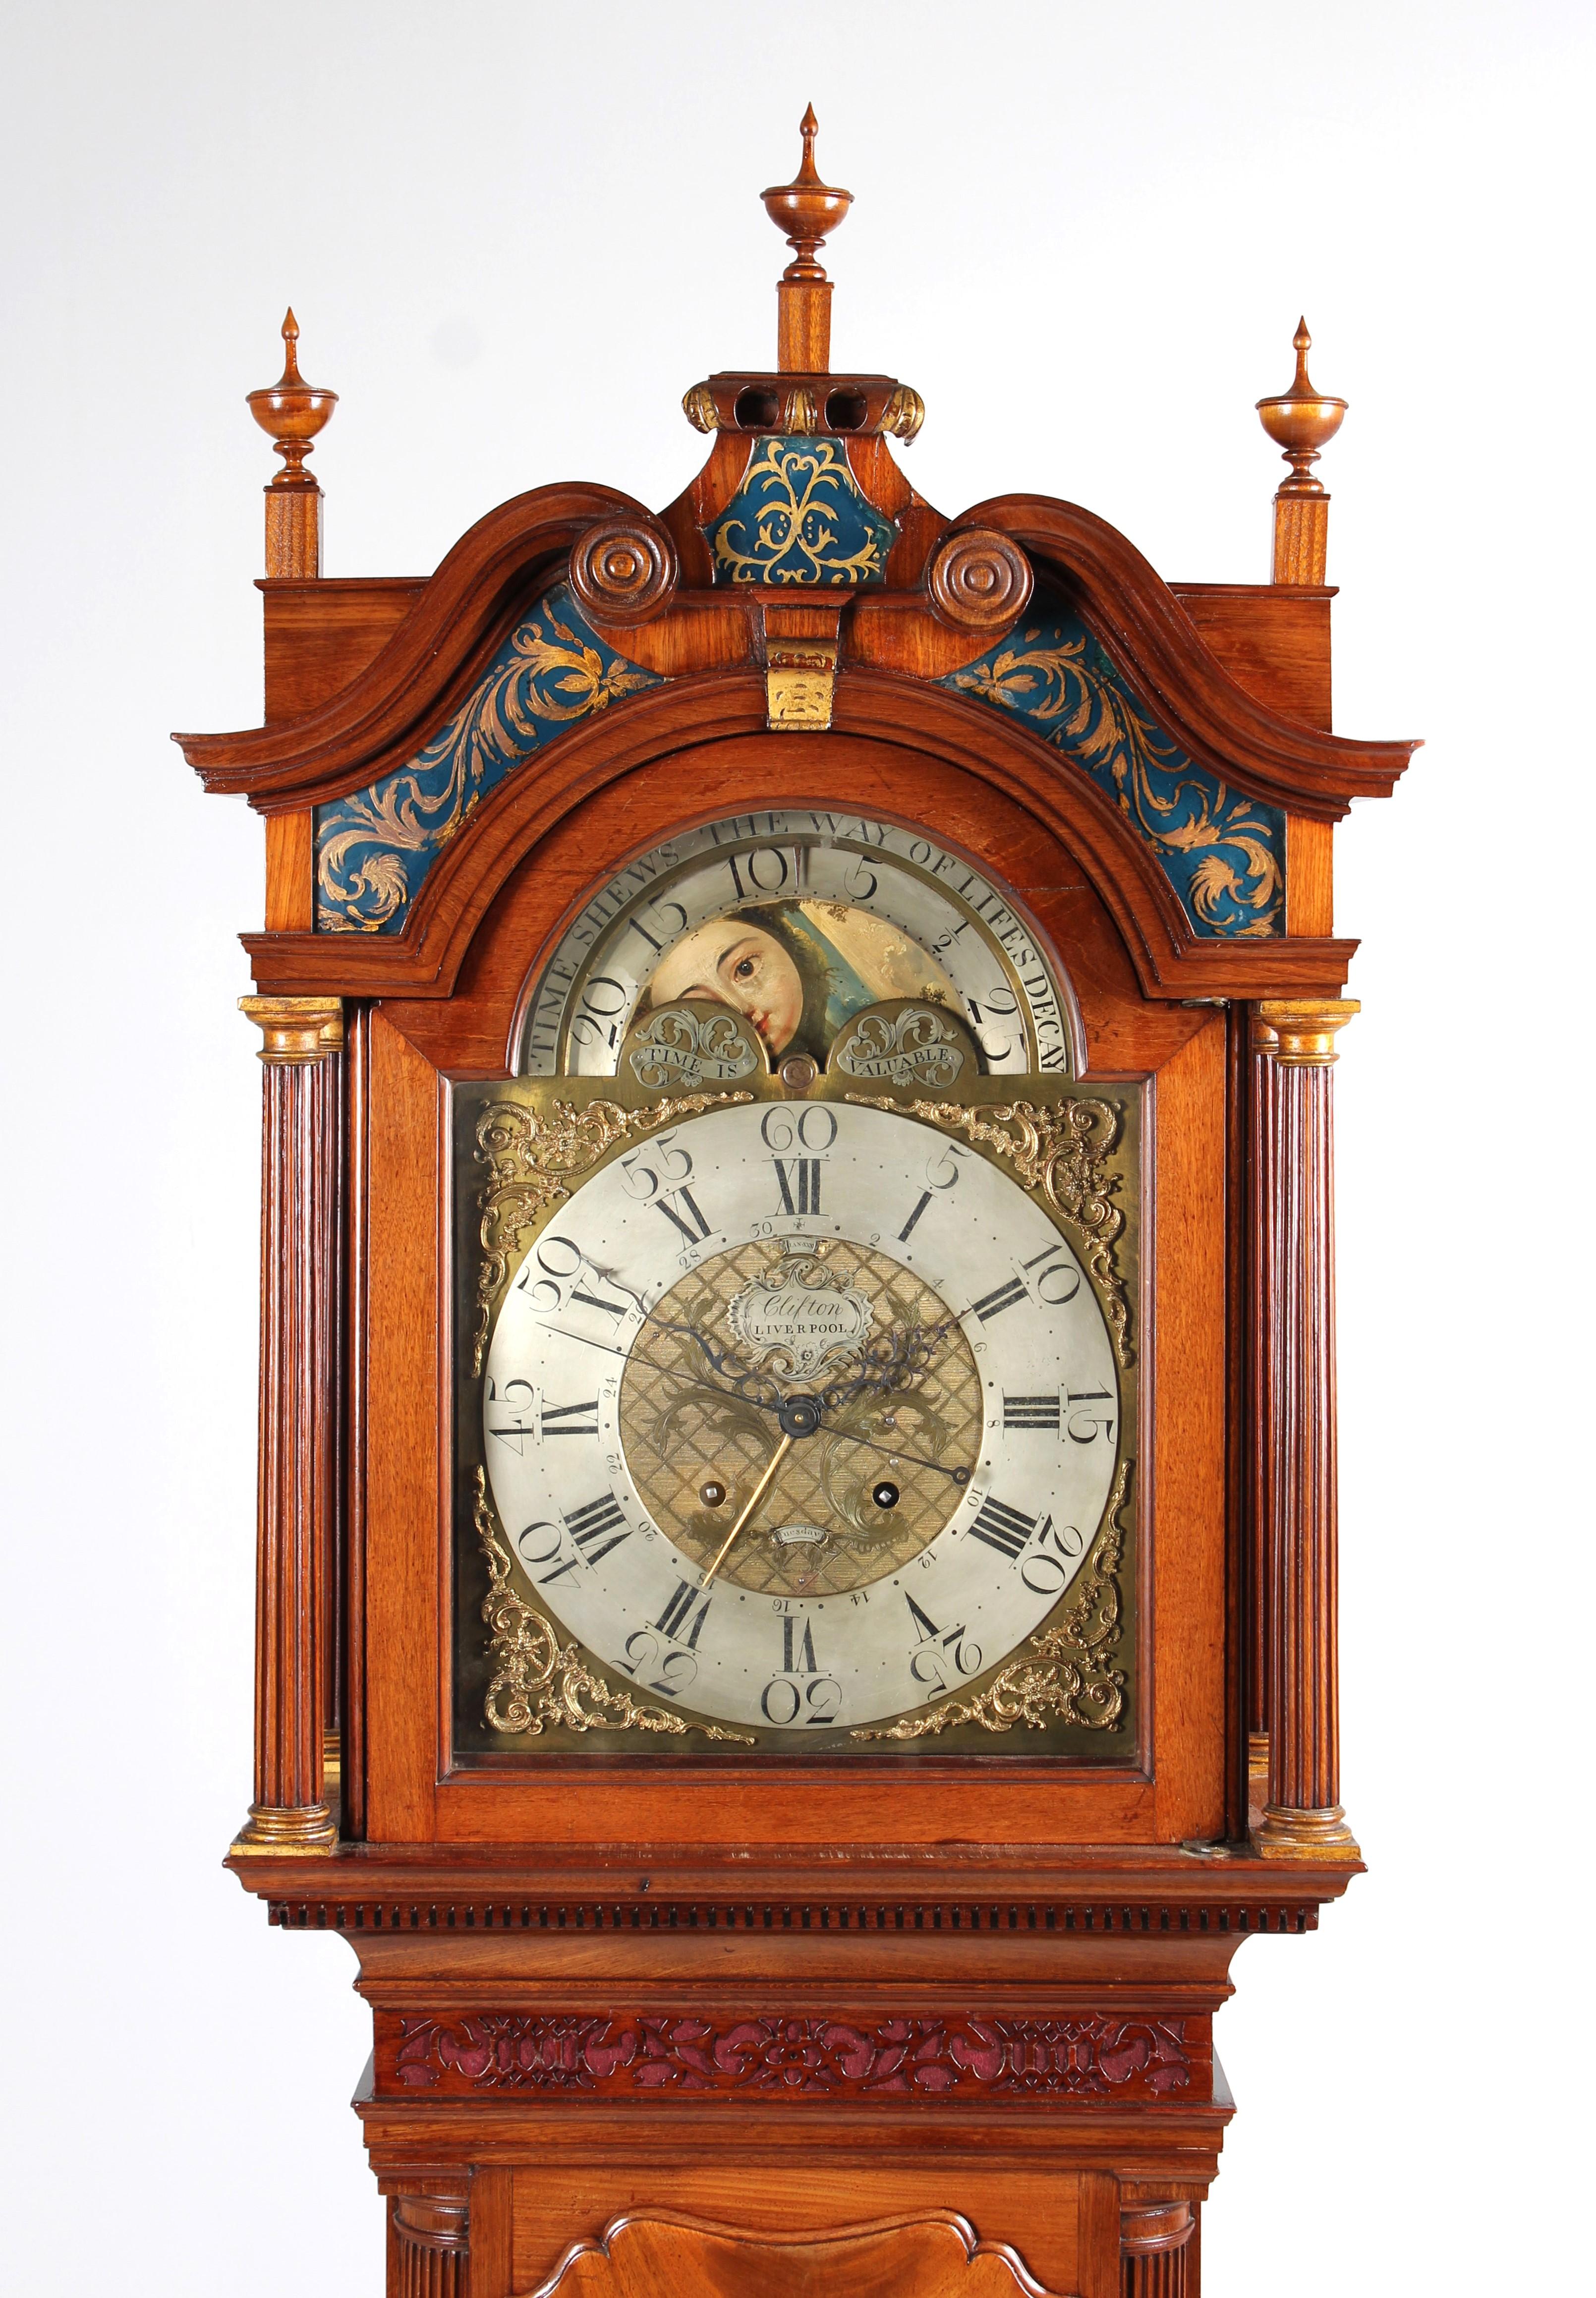 Antique grandfather clock with date, moon phase and central second hand

Liverpool
Mahogany
around 1785

Dimensions: H x W x D: 246 x 53 x 26 cm

Description:
Antique Lancashire longcase clock from the late 18th century with a particularly